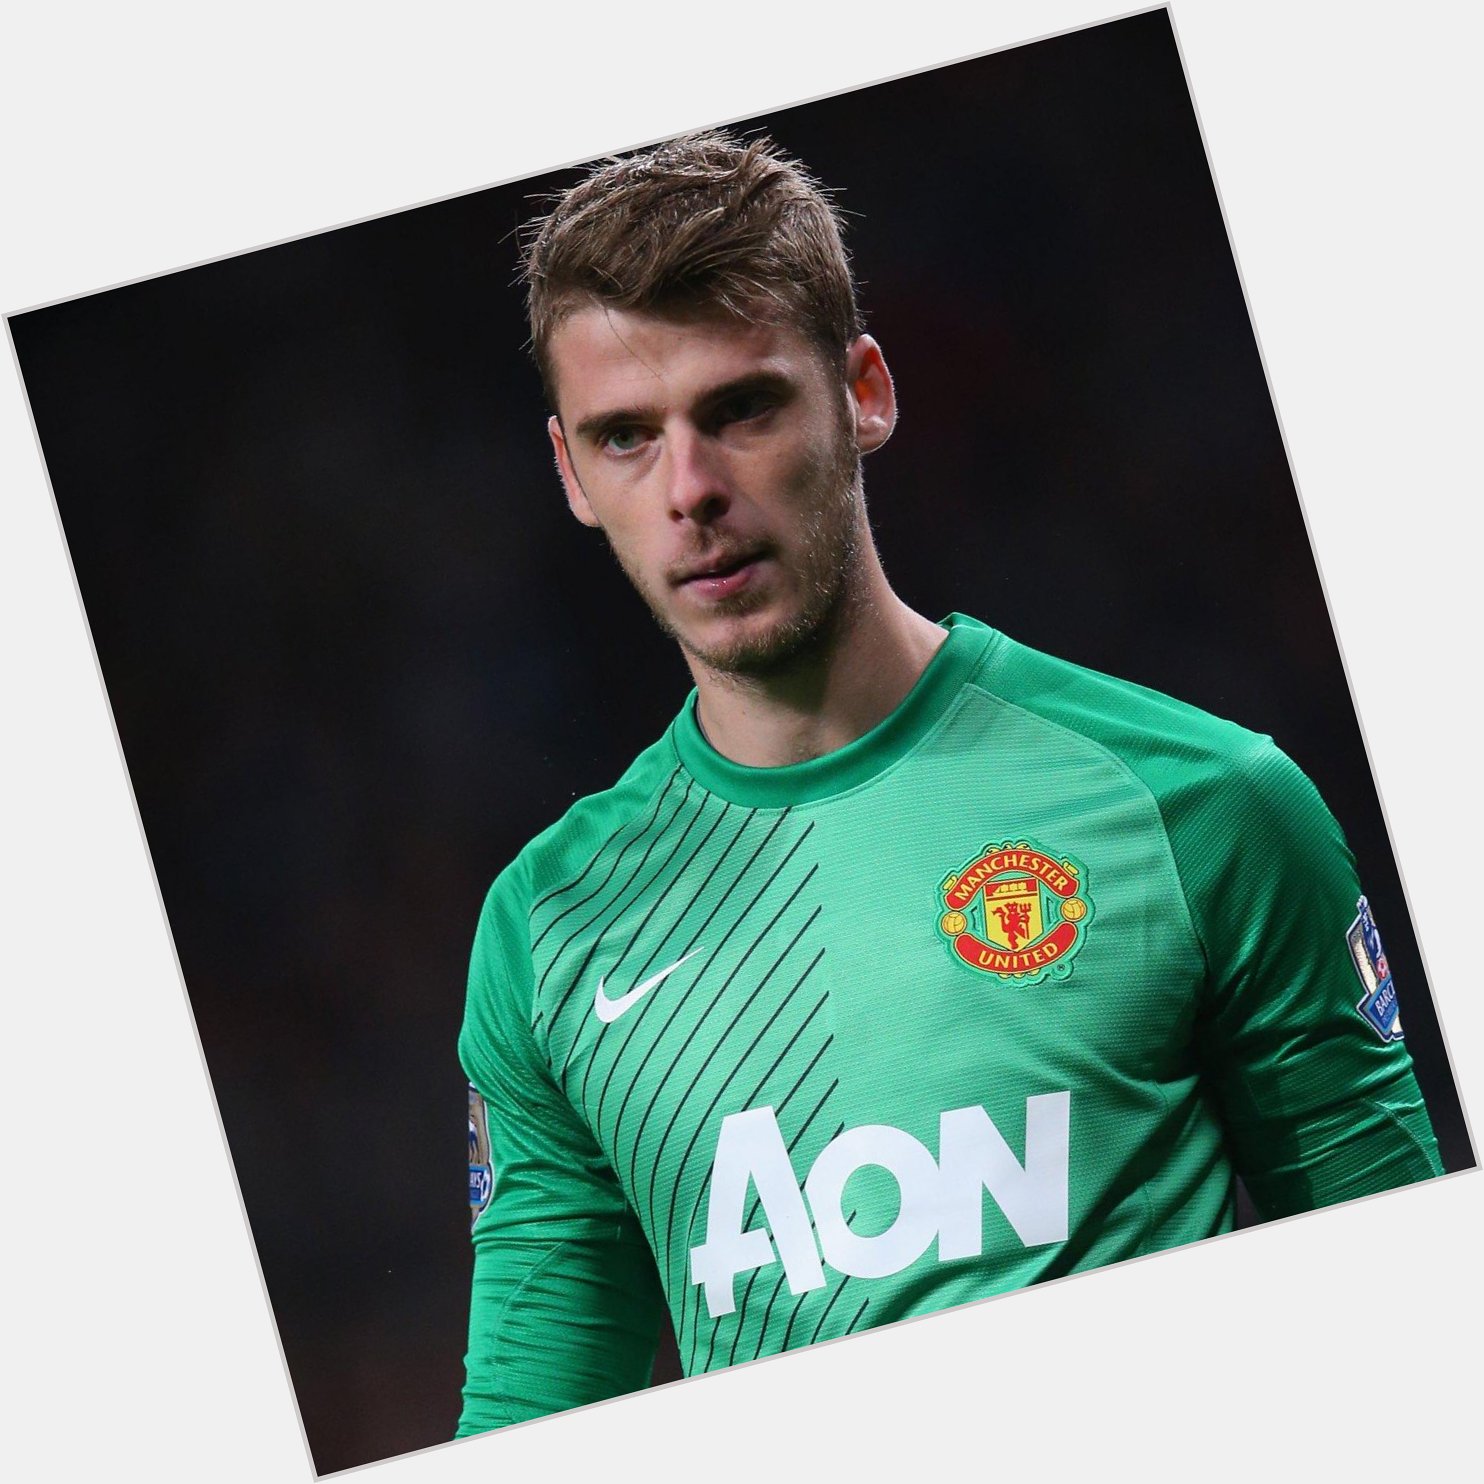 Happy Birthday to Manchester United goalkeeper David De Gea who turns 24 today - 